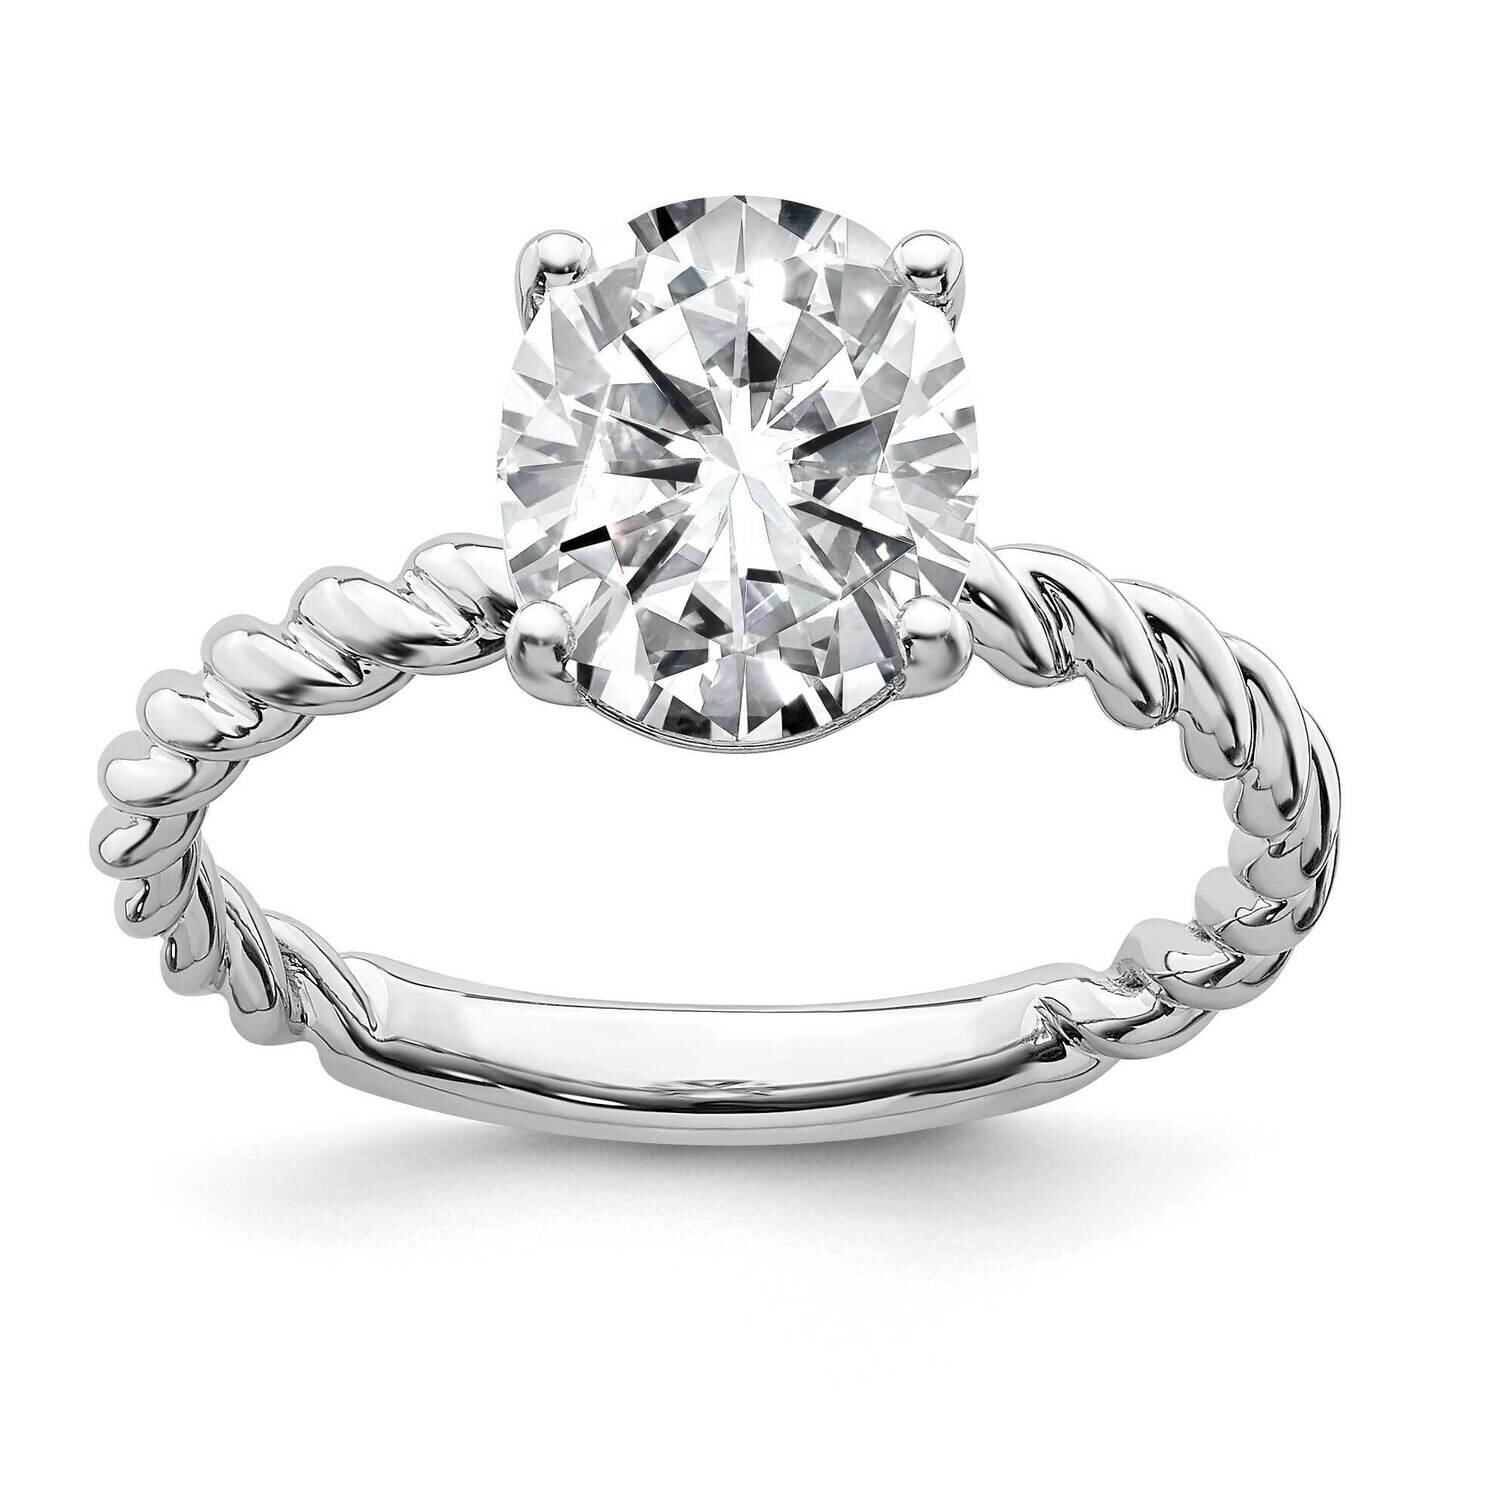 3ct. G H I True Light Oval Twisted Moissanite Solitaire Ring 14k White Gold RM6799-300-WMT